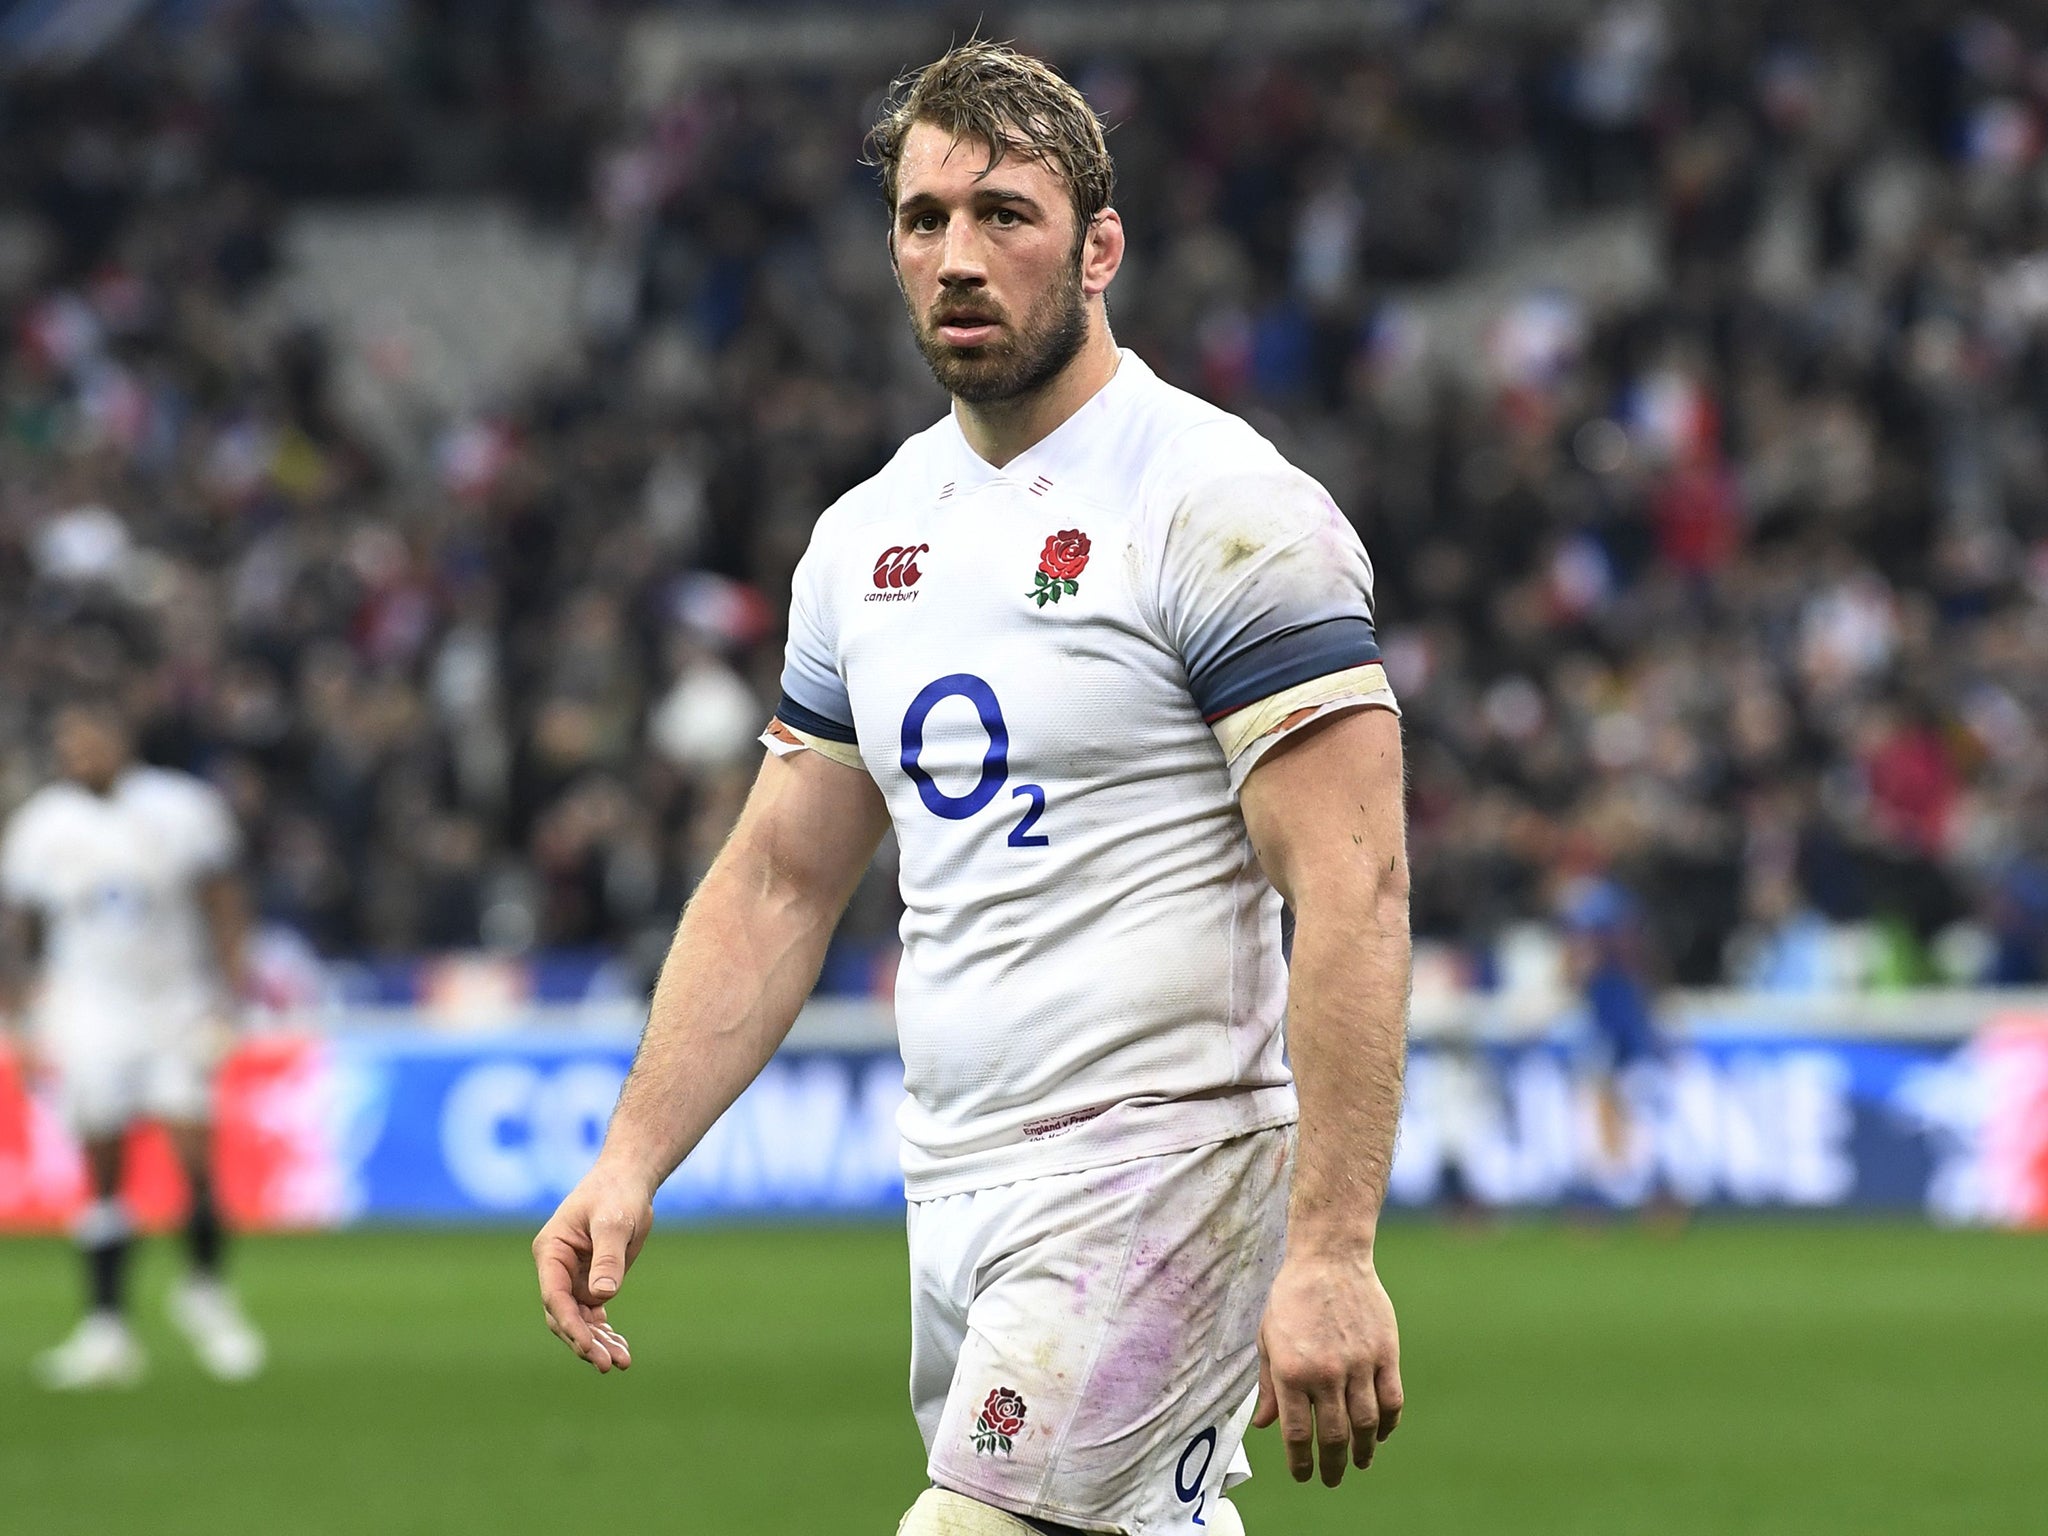 England internationals are being asked to peak throughout the season